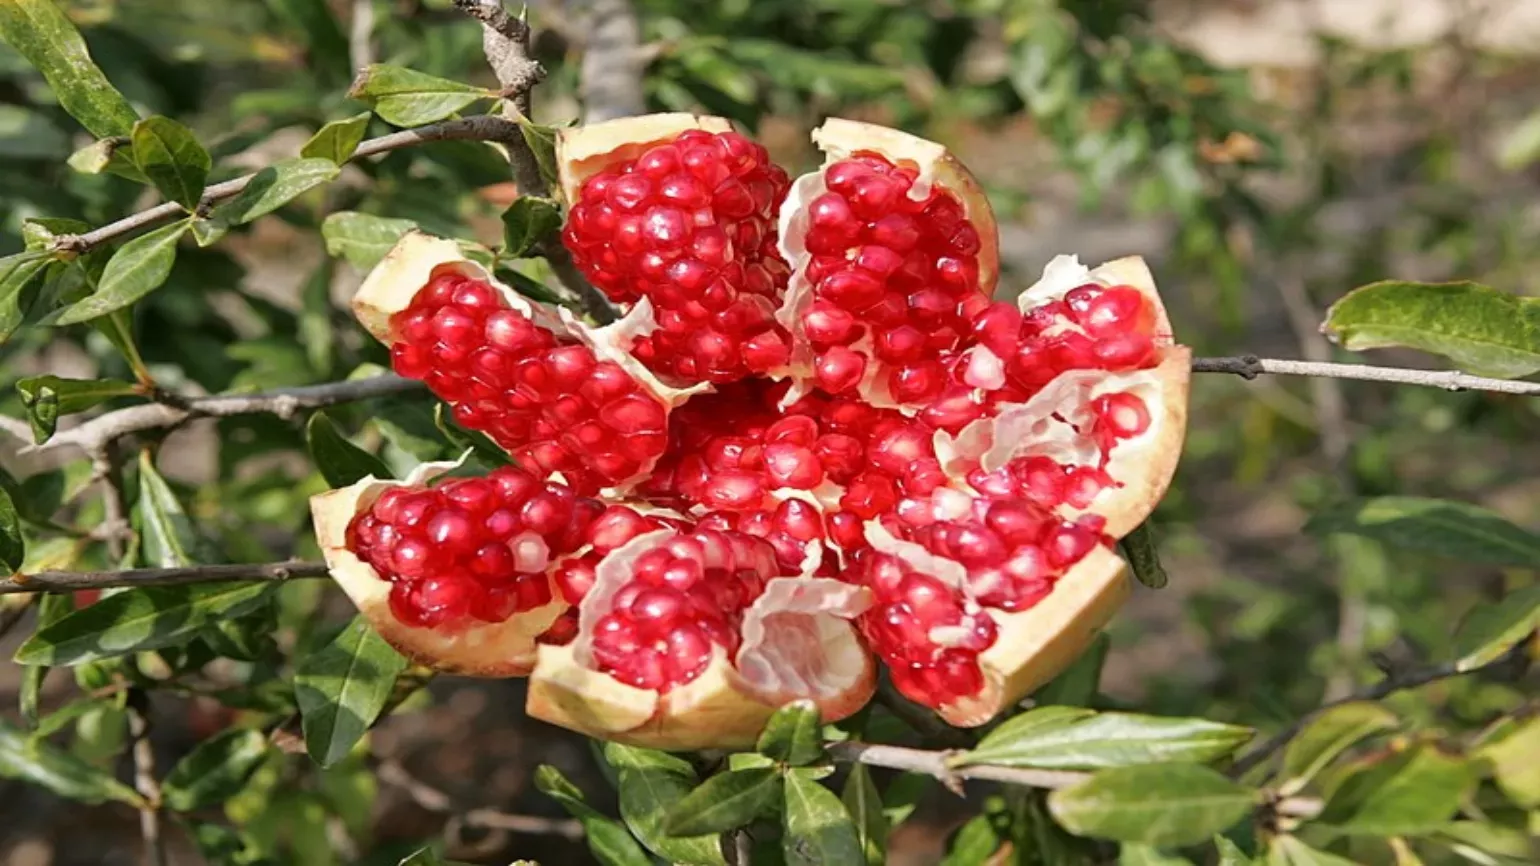 Open pomegranate (Punica granatum) fruit that is spherical and red with deep red tissue surrounding seeds